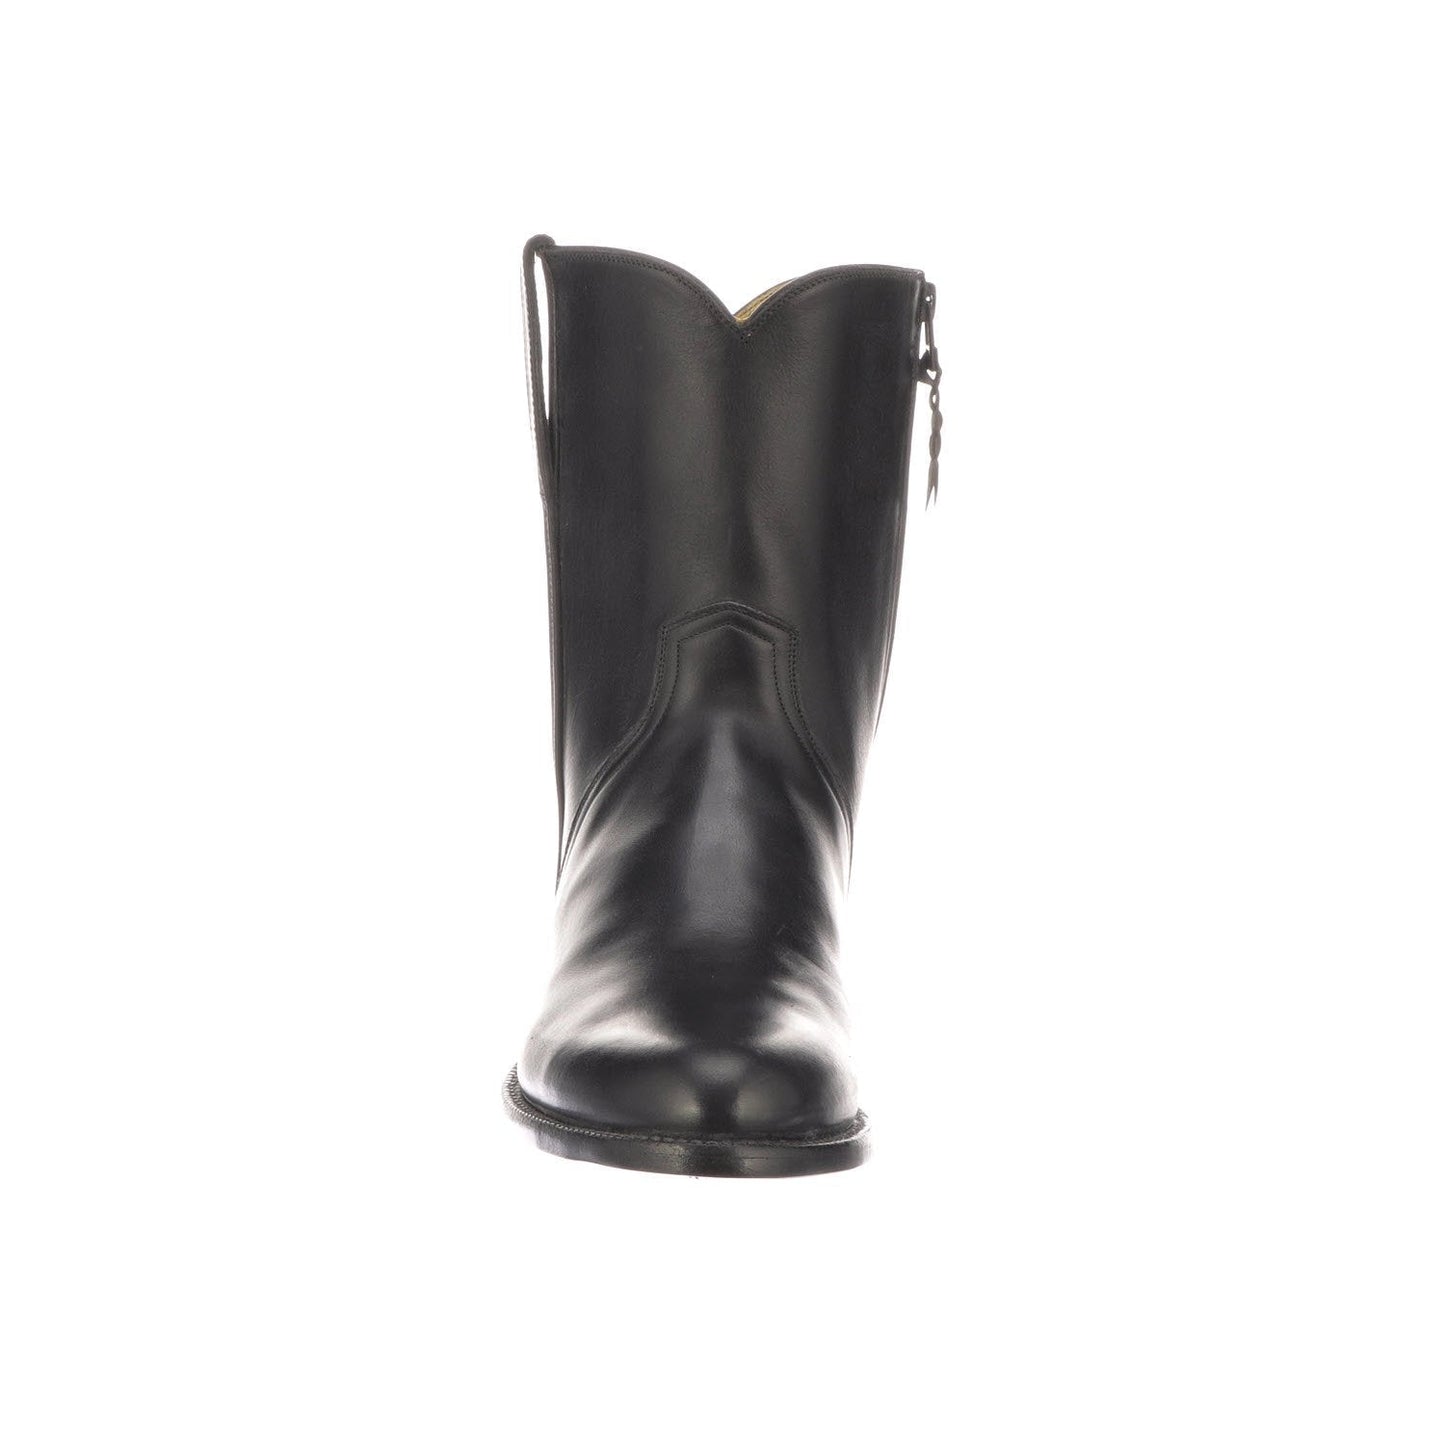 GY8900.RR Lucchese Men's SCOUT Black Oiled Calf Zip Boot